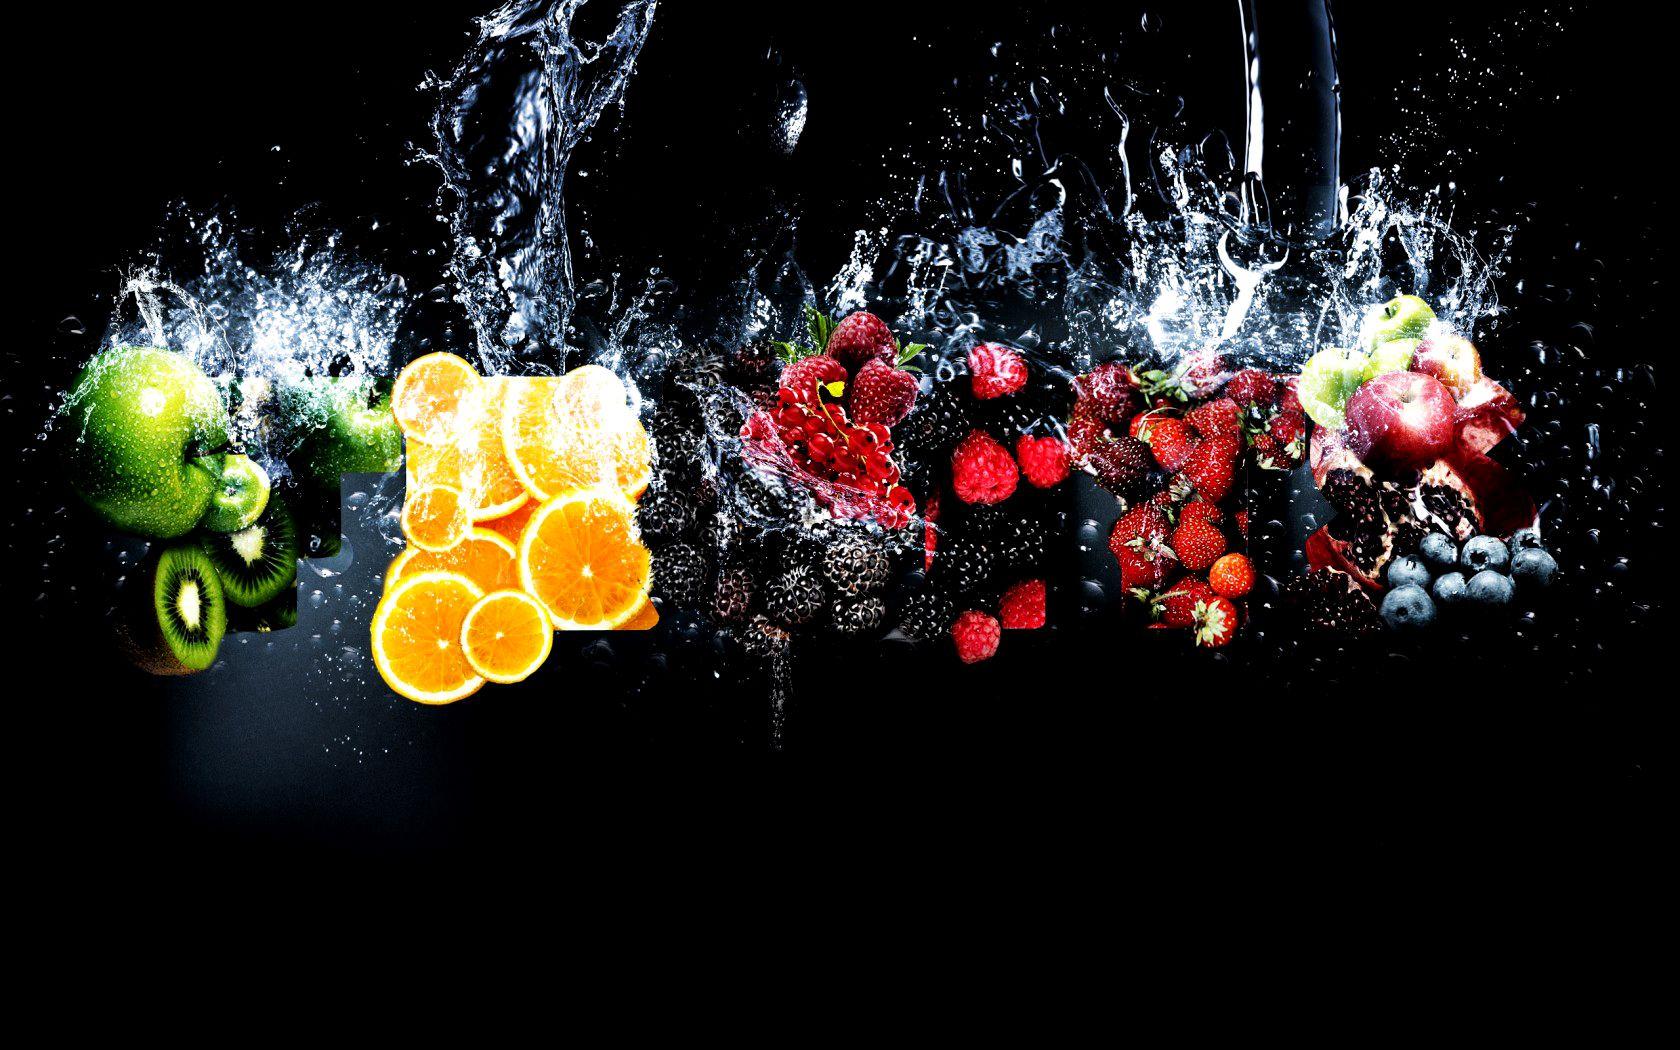 healthy background images